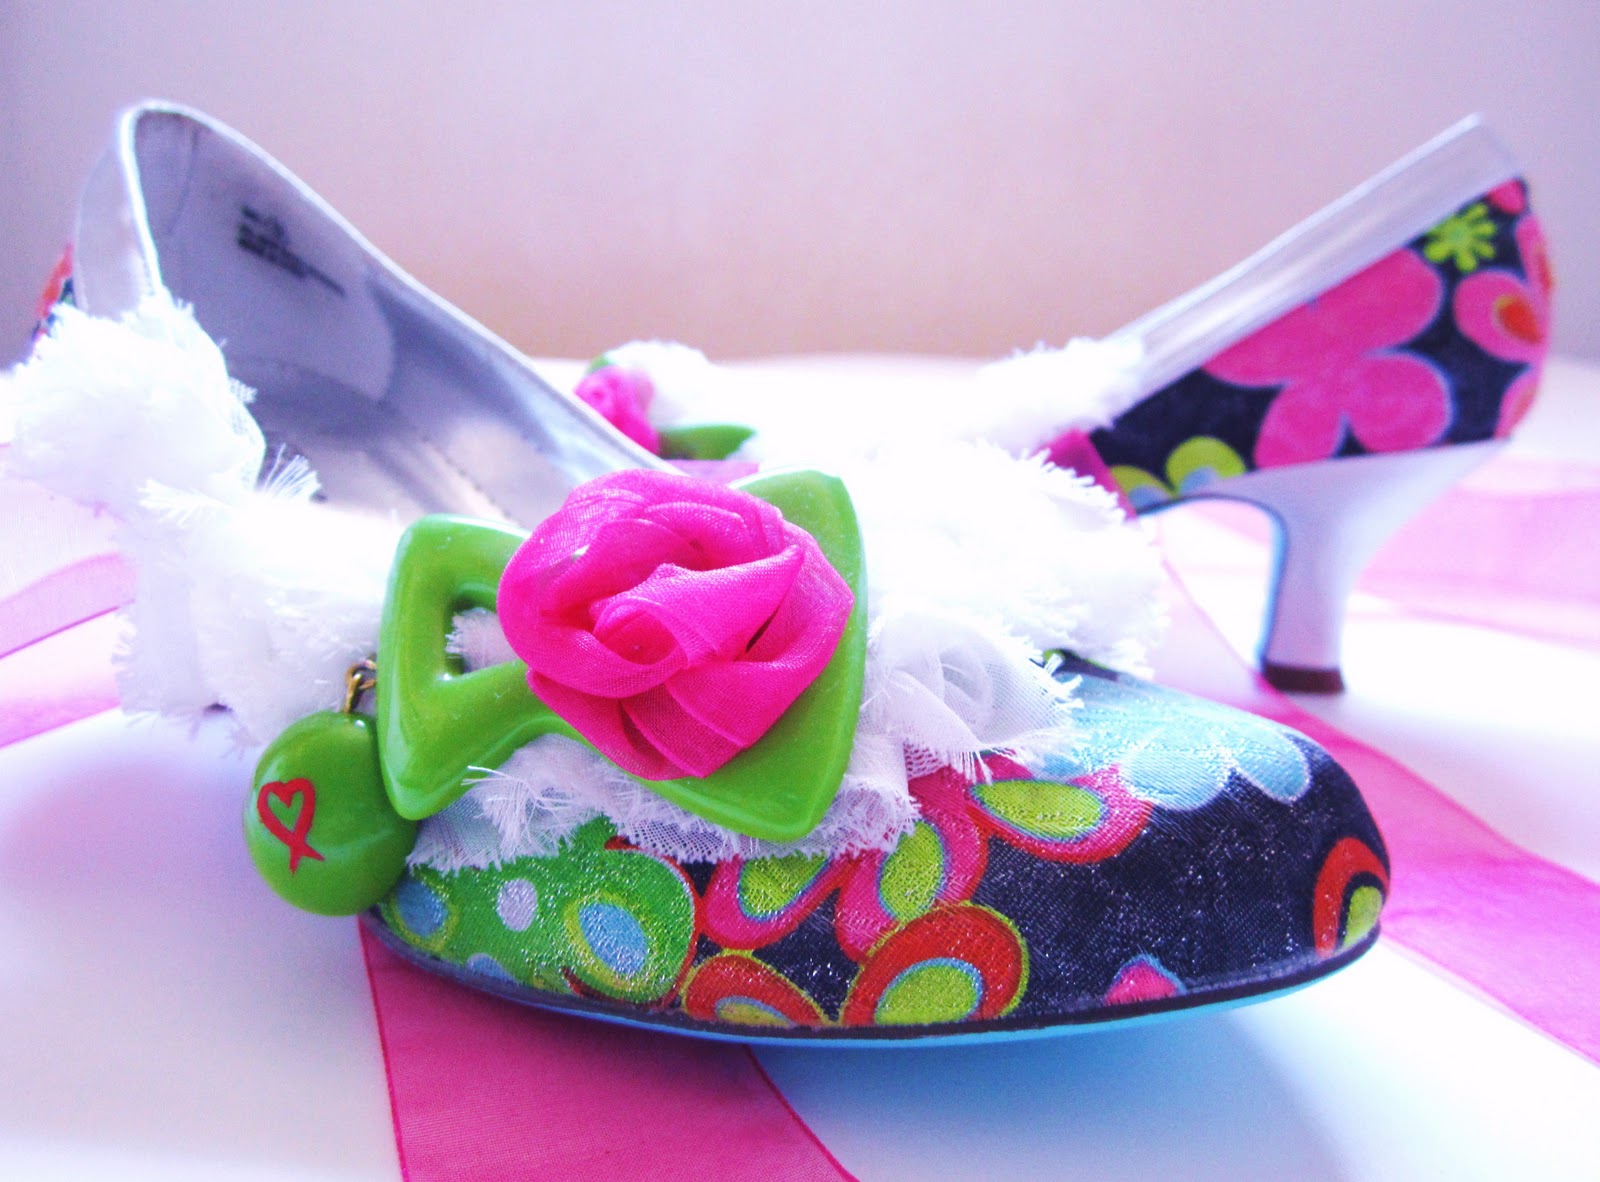 Behind The Painted Shoes by Love, Miranda Marie: January 2012